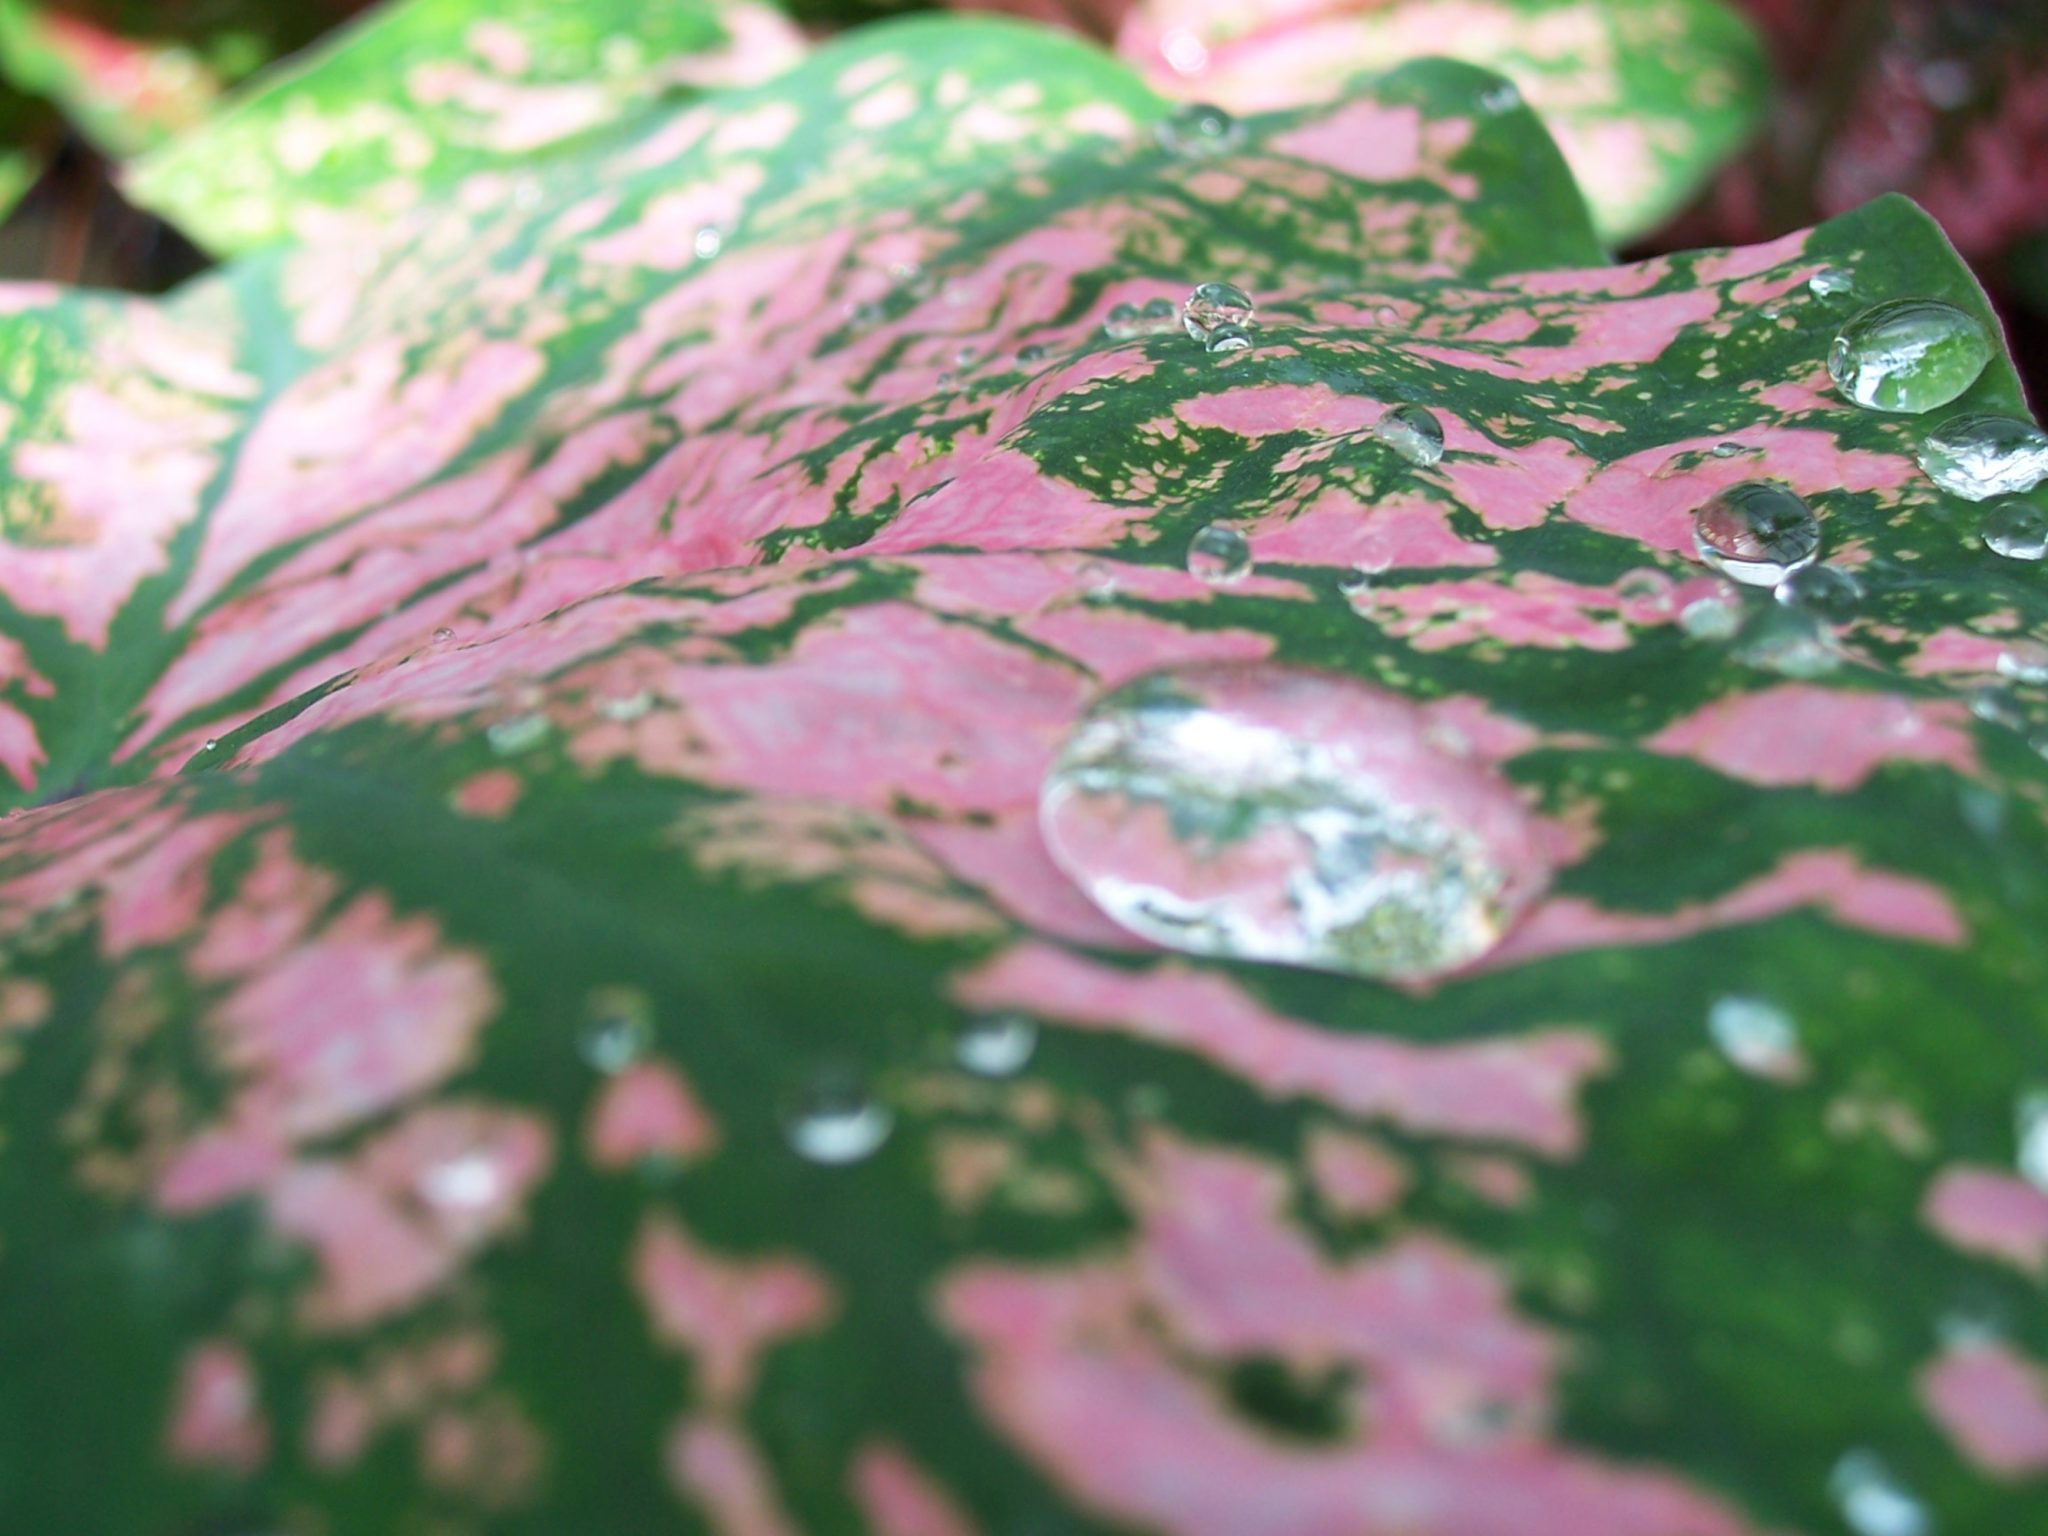 Water on pink and green leaf